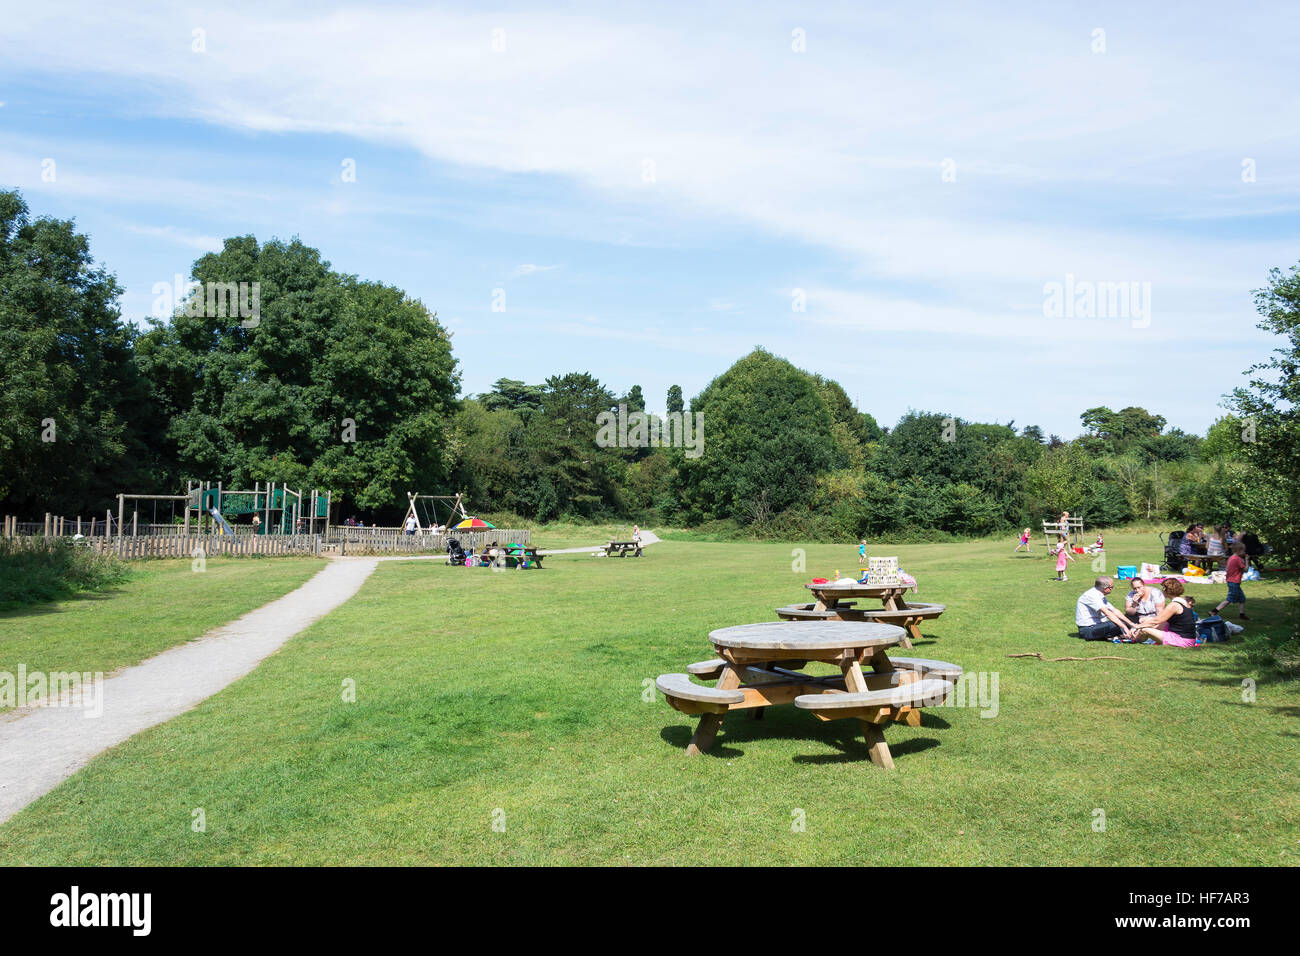 Manor Park Country Park, West Malling, Kent, England, Regno Unito Foto Stock